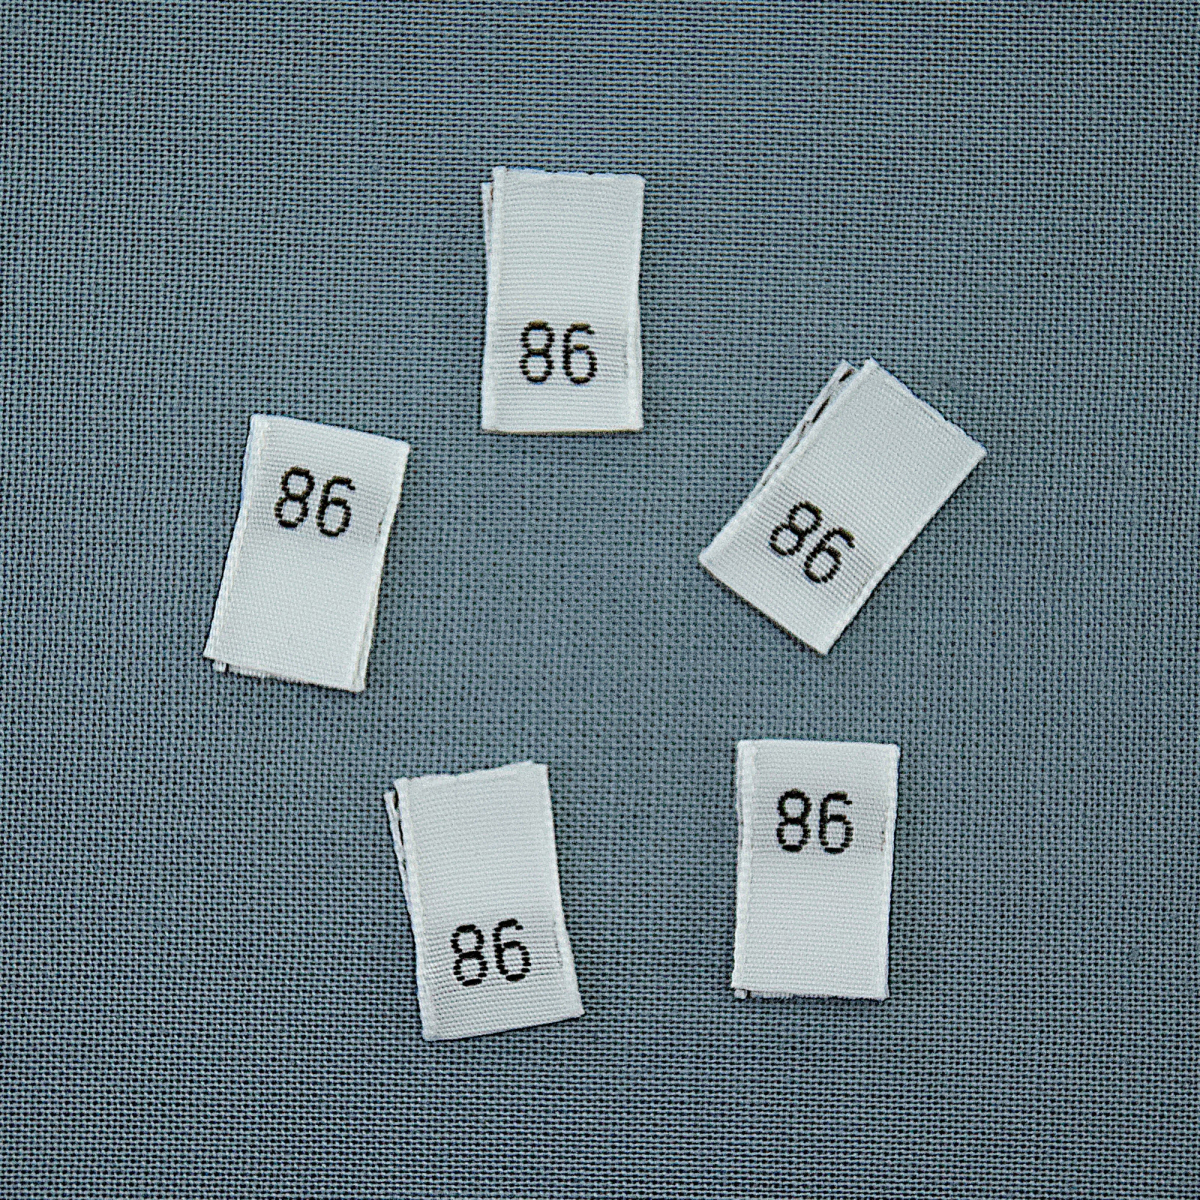 Clothing Label Style 86 Baby Label